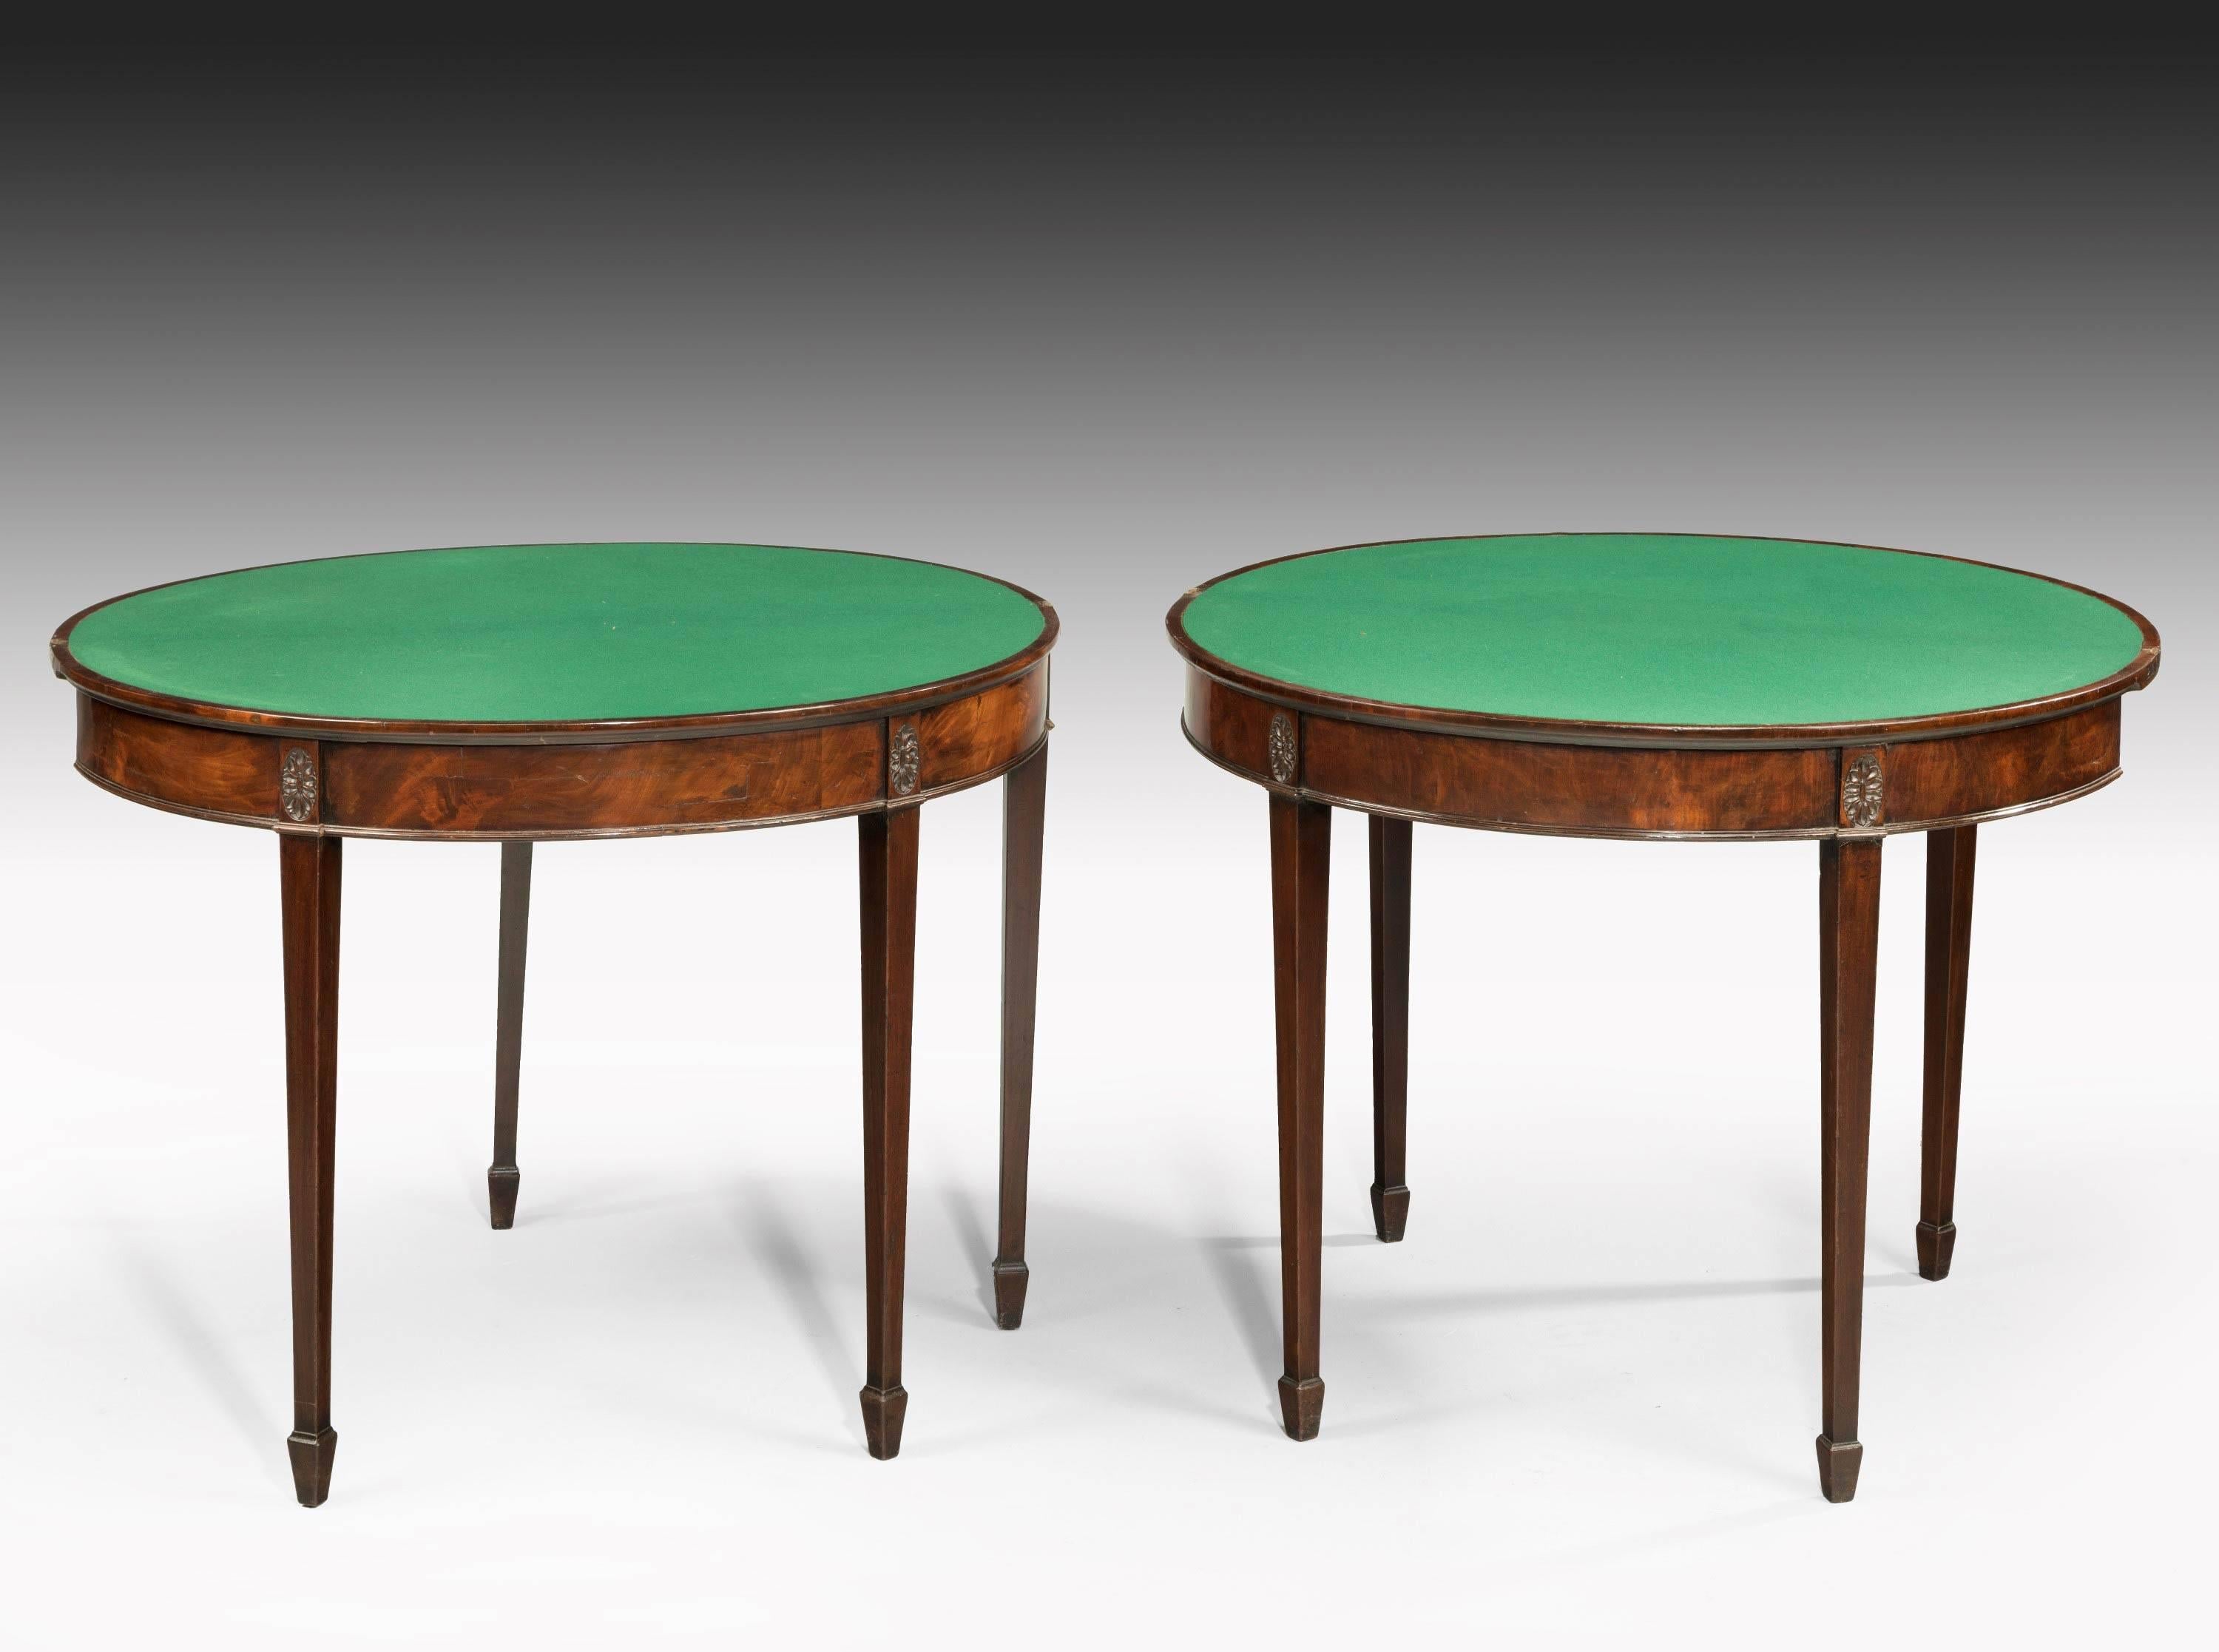 A pair of George III period mahogany tea and card tables. Showing Sheraton influence with banding in boxwood and line inlay to the edges and oval patera to the top square chamfered supports.